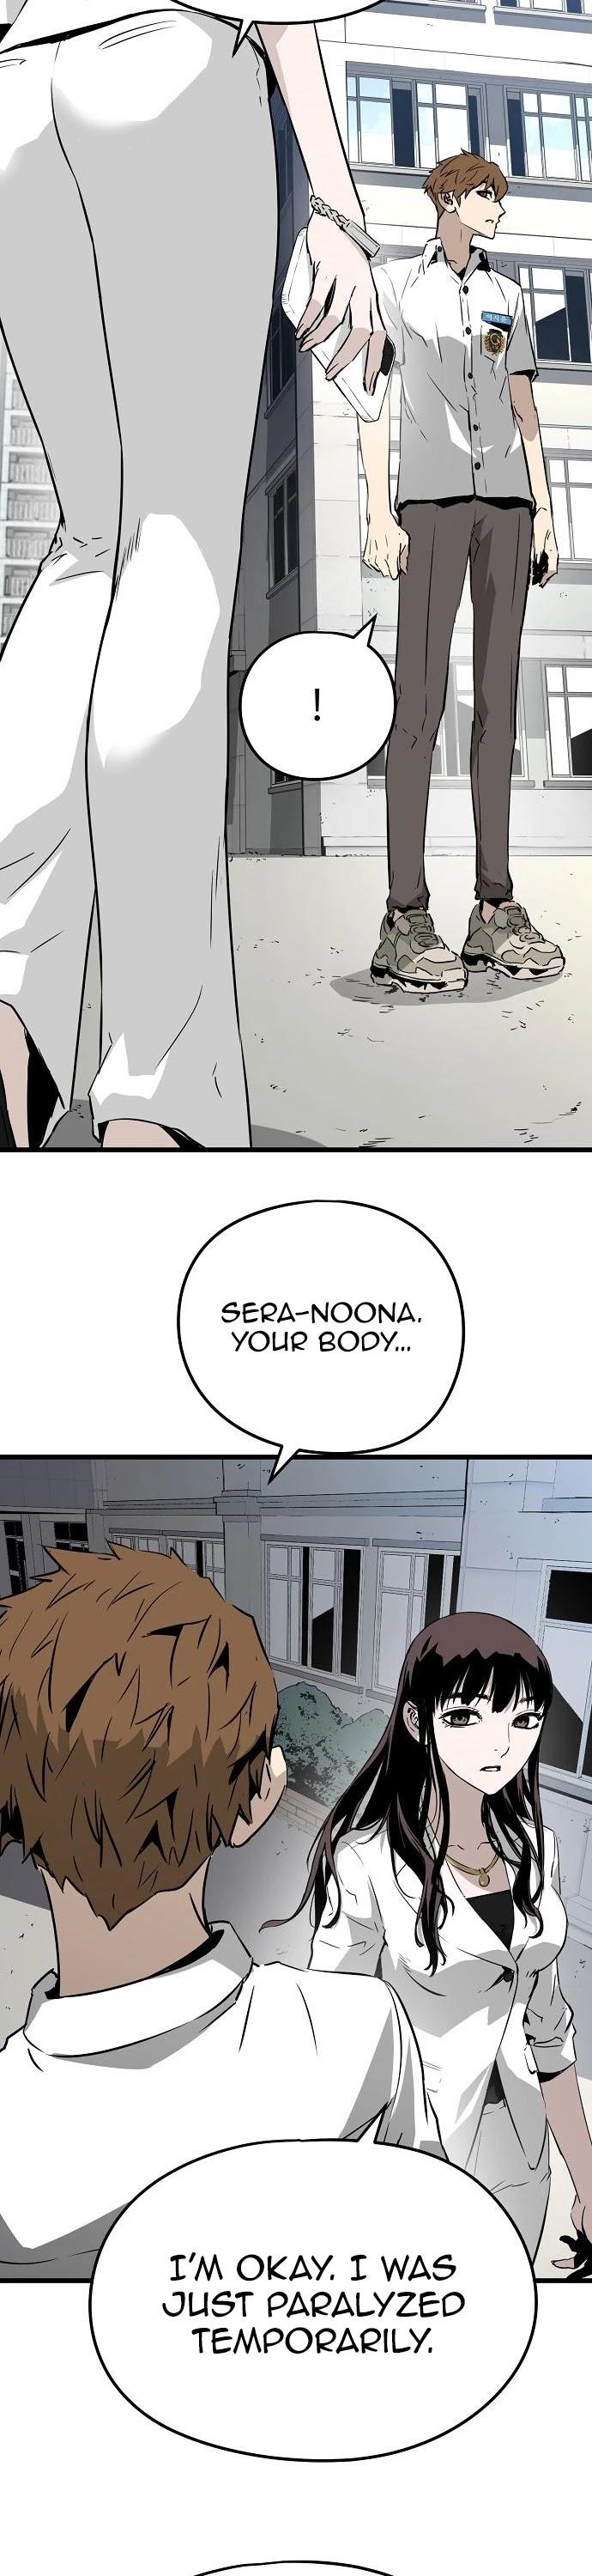 The Breaker: Eternal Force Chapter 3 page 70 - 